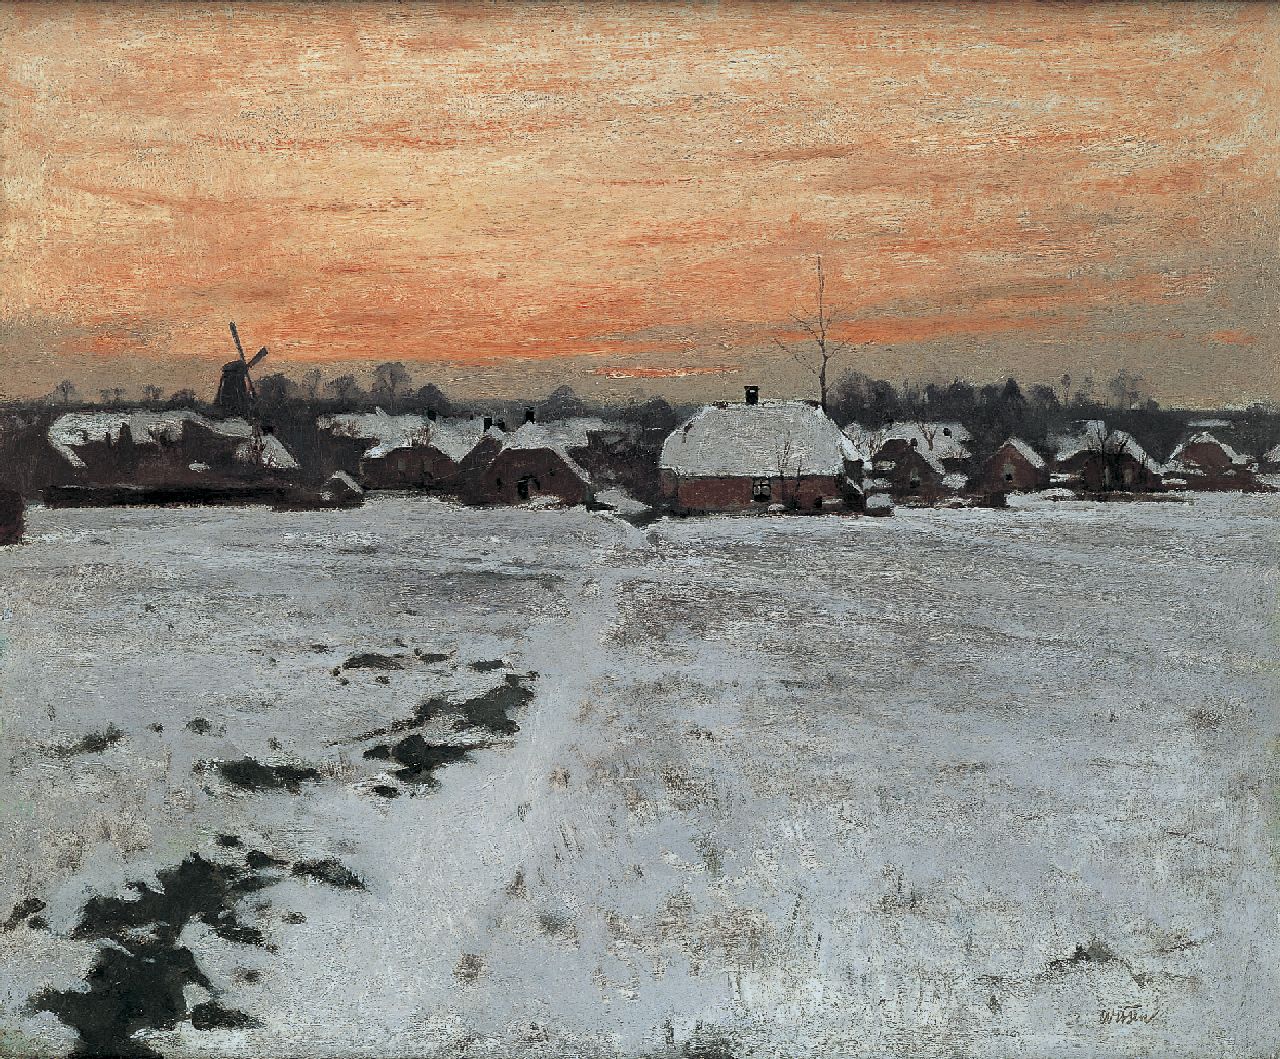 Witsen W.A.  | 'Willem' Arnold Witsen, Evening twilight, Ede, oil on canvas 45.0 x 54.0 cm, signed l.r. and painted circa 1895